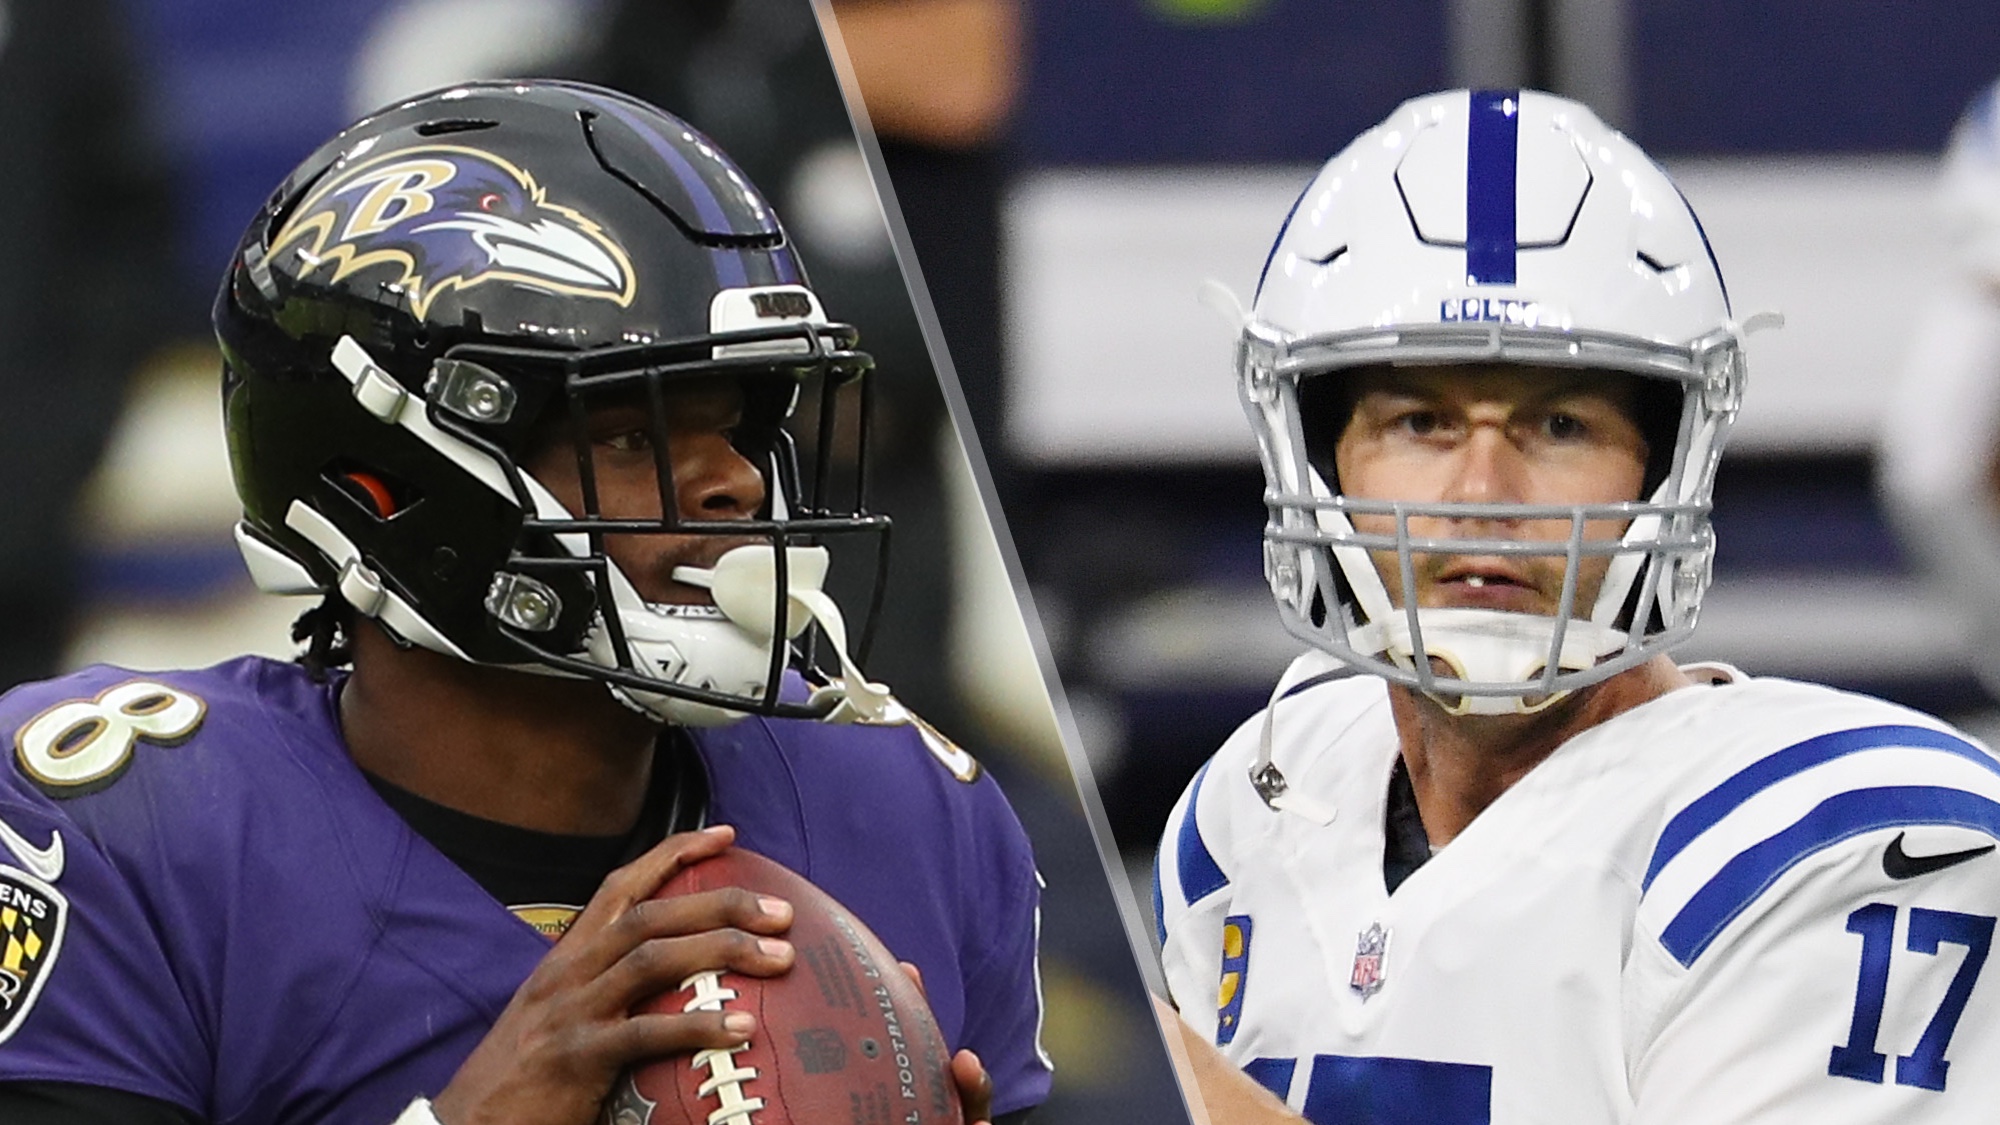 Ravens vs Colts live stream: How to watch NFL week 9 game online